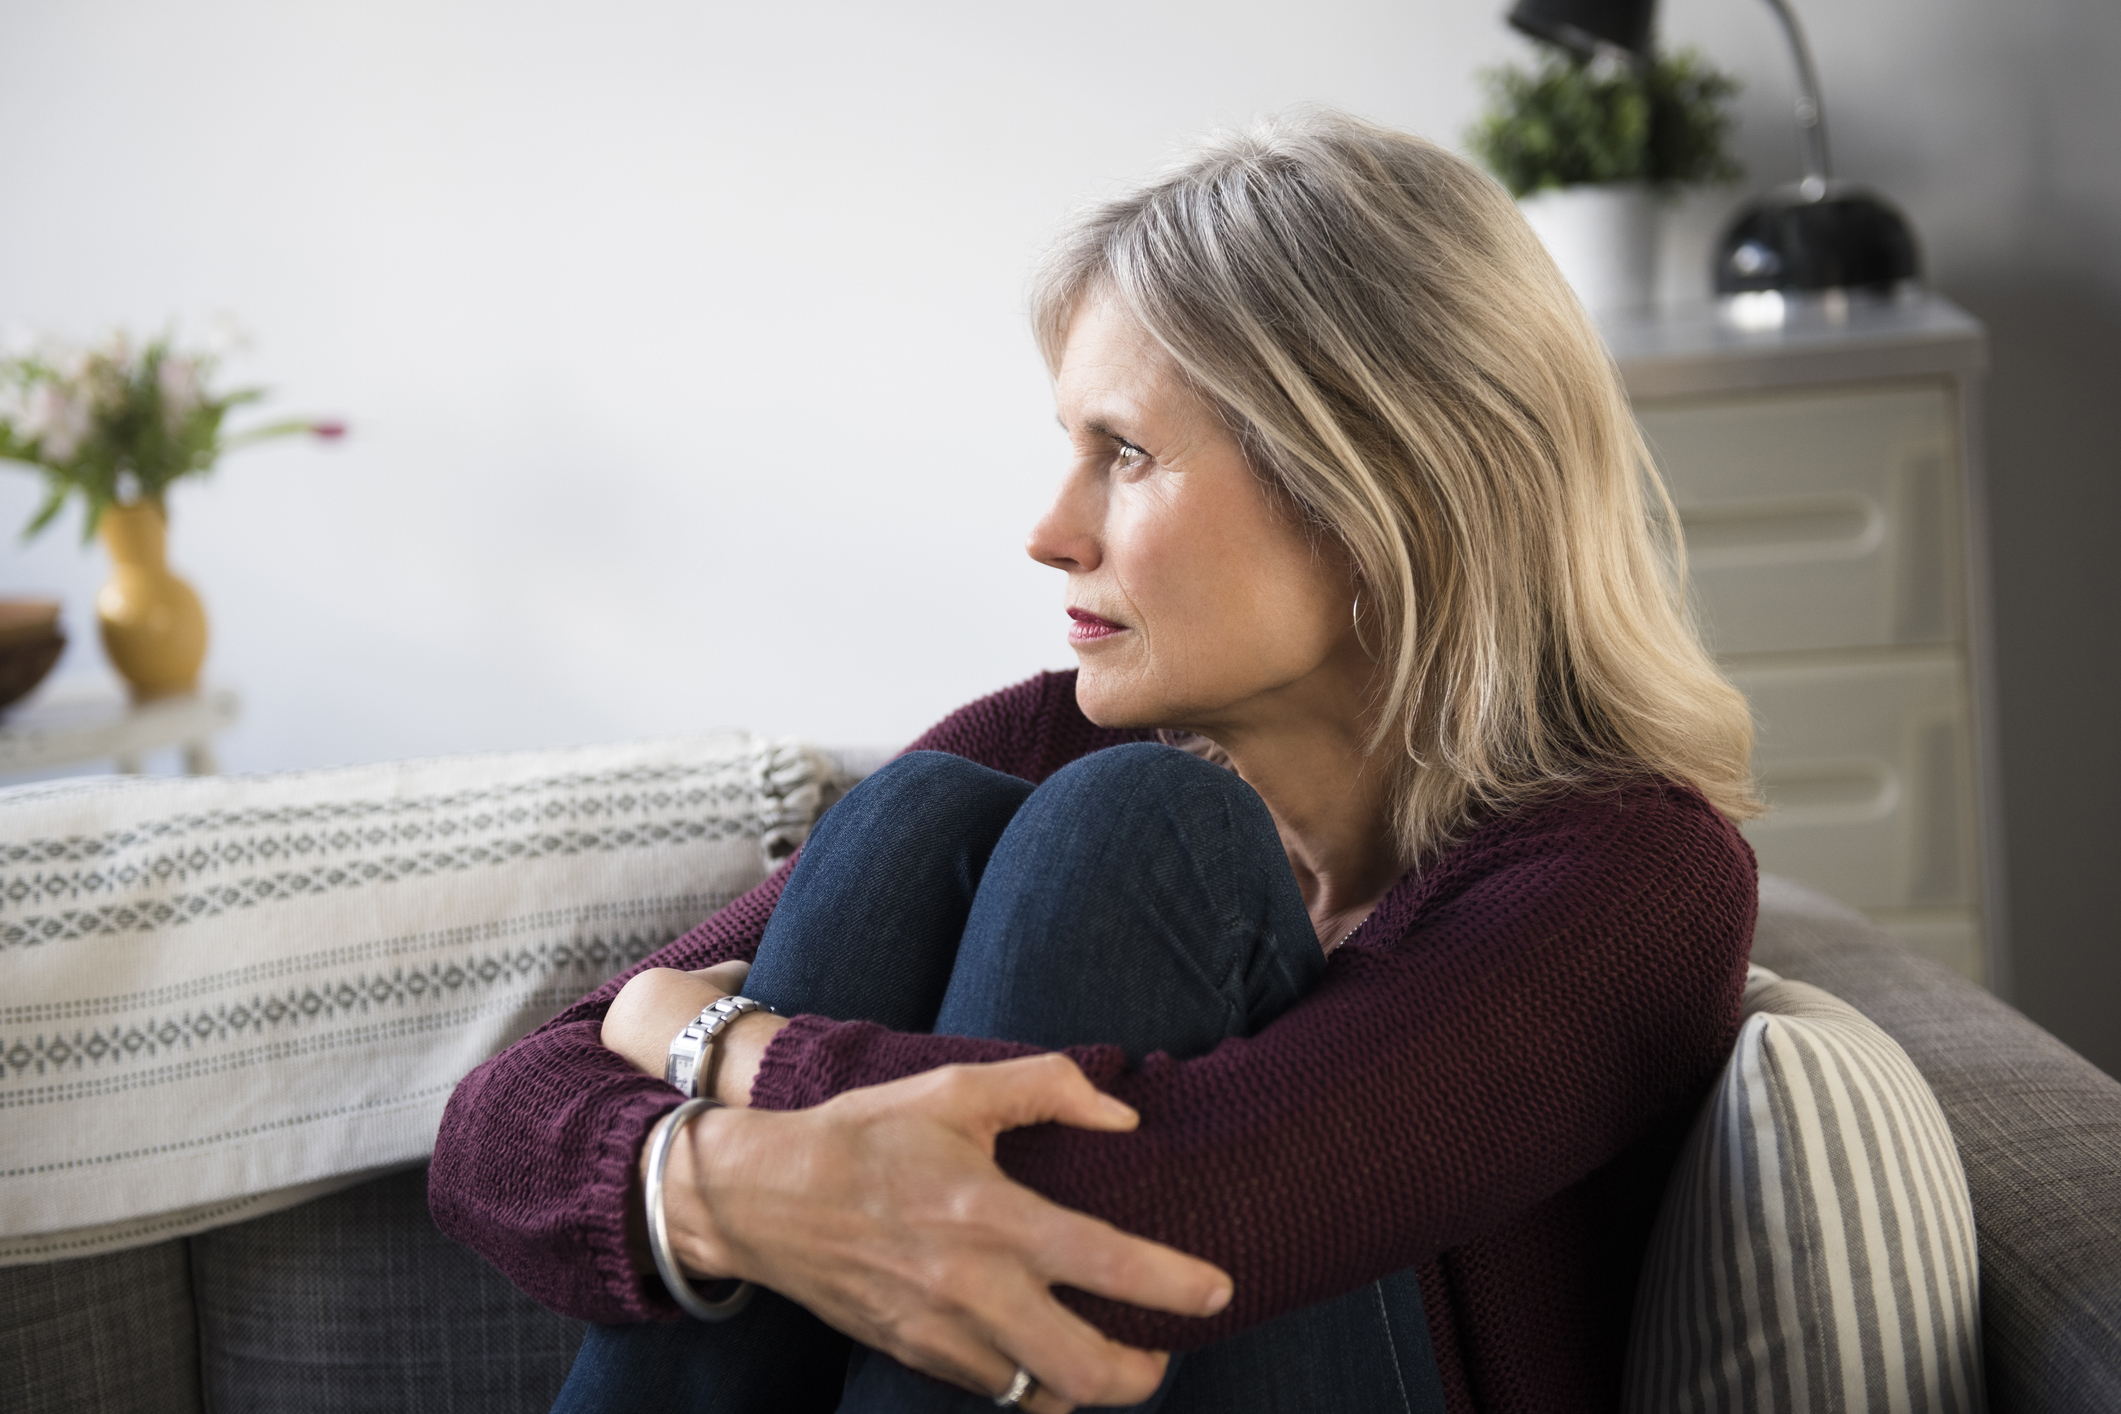 Woman sitting on couch looking thoughtful with arms wrapped around her knees